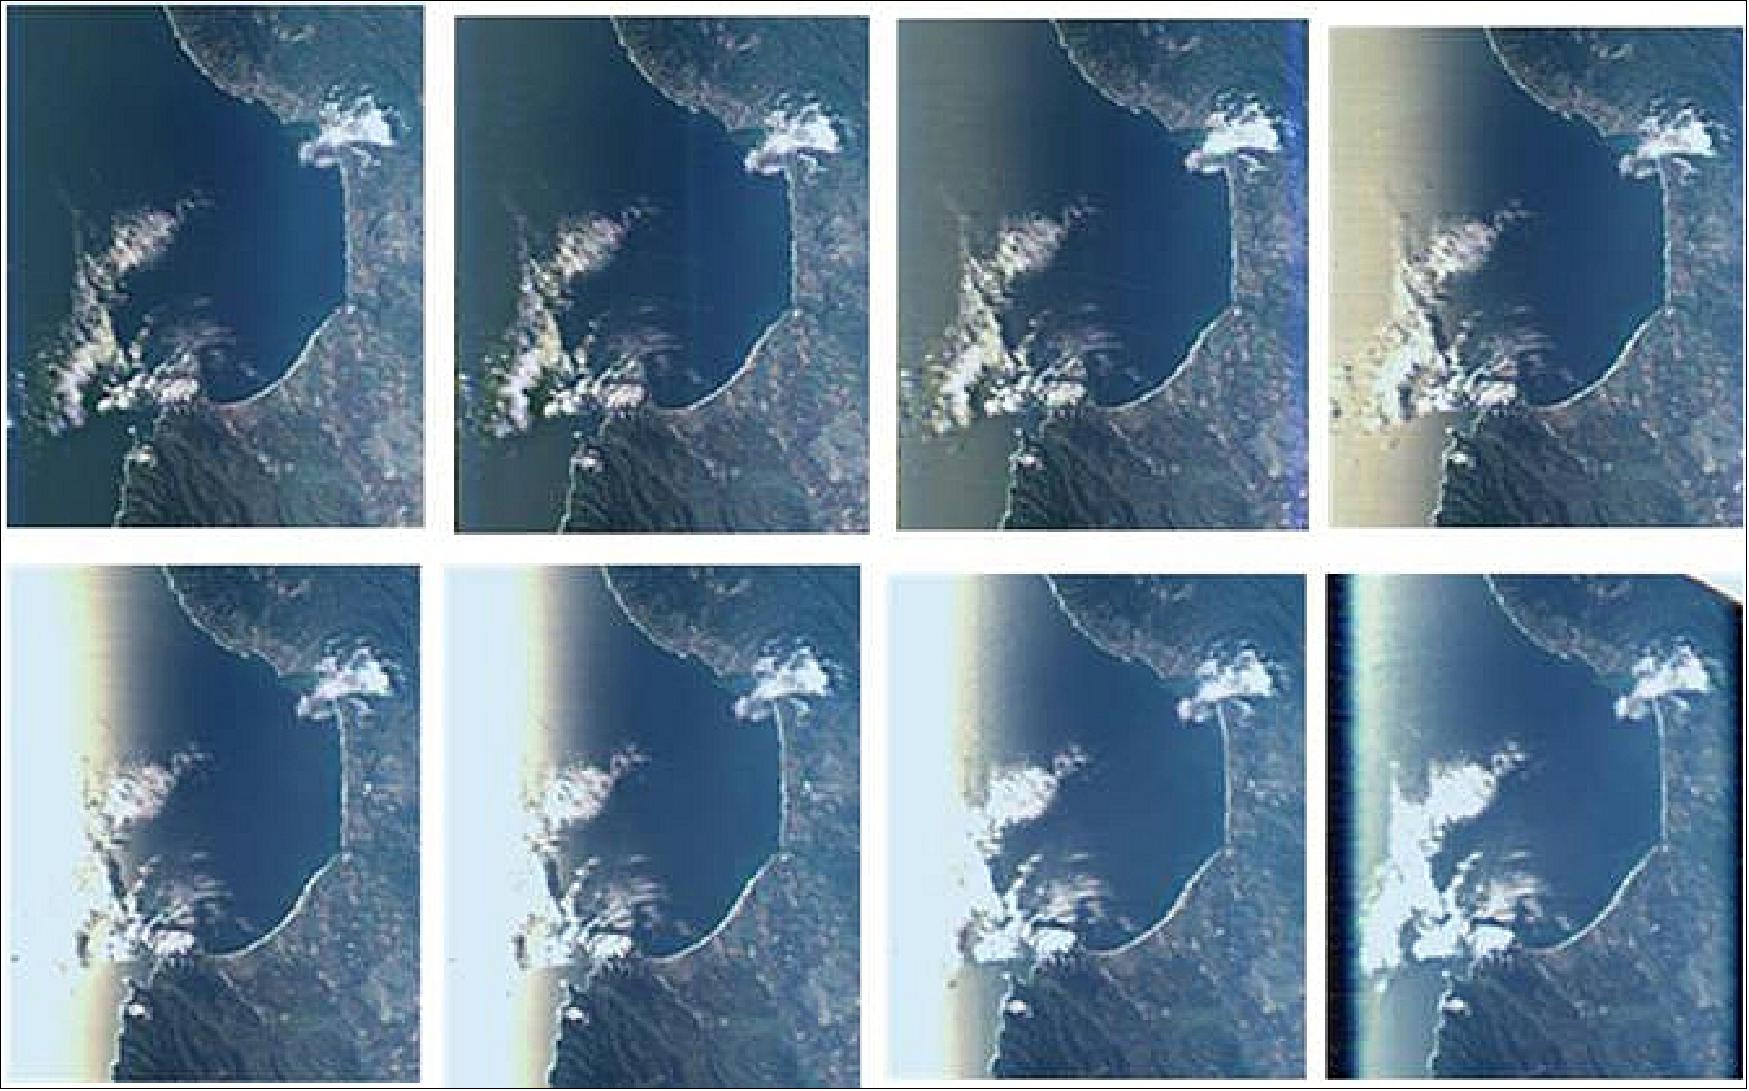 Figure 12: A series of pictures of the coast of California taken during the PODEX (Polarimeter Definition Experiment) campaign by the PACS multi-angle imaging polarimeter taken from the NASA ER-2 aircraft (image credit: NASA)